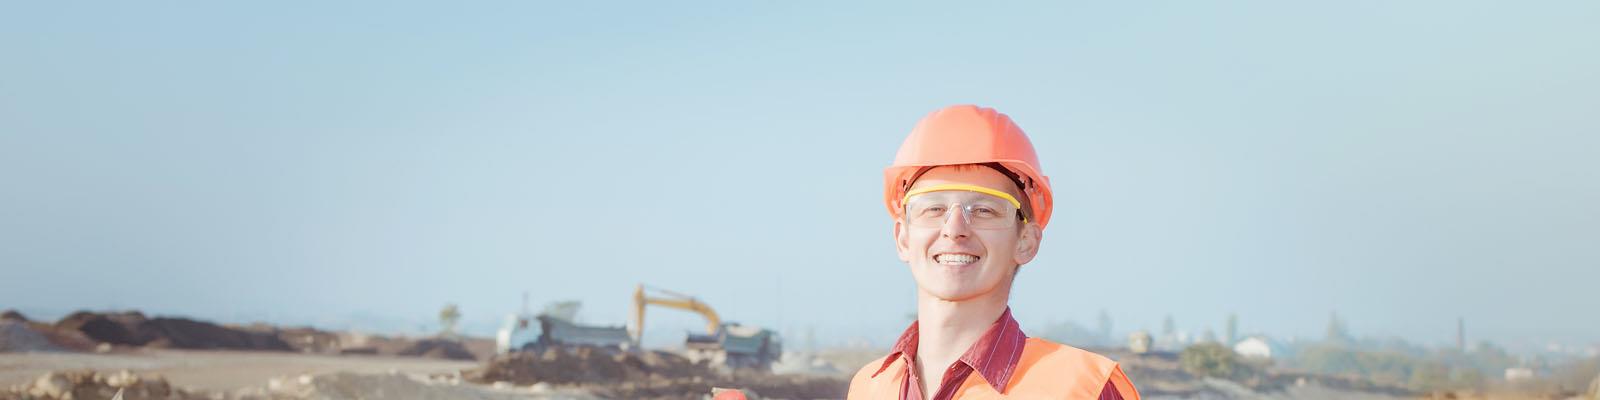 Civil engineer standing in front building construction